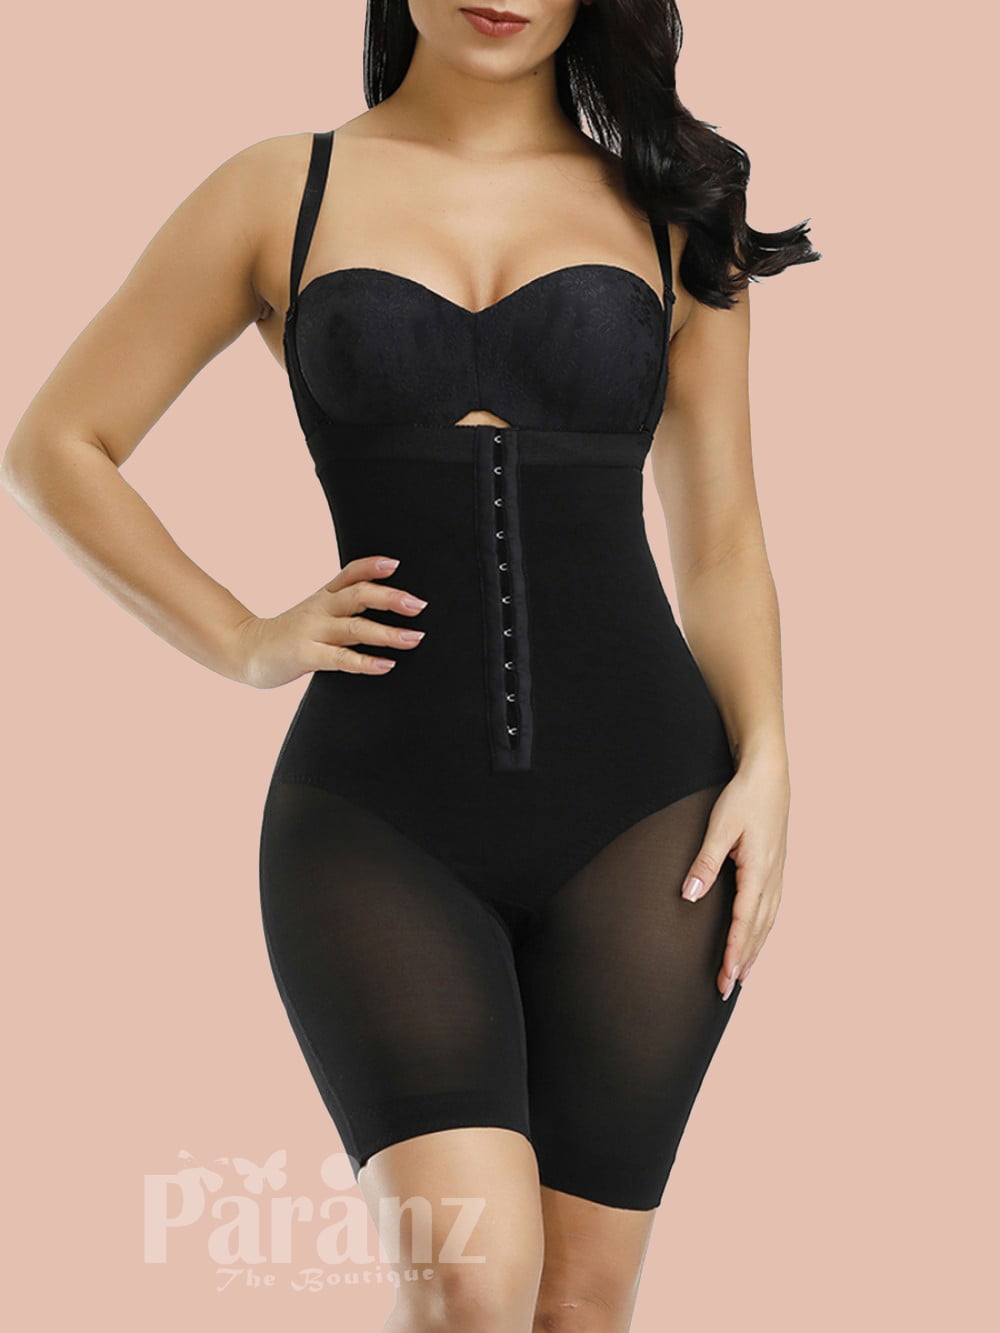 Wholesale Shapewear With Open Crotch To Create Slim And Fit